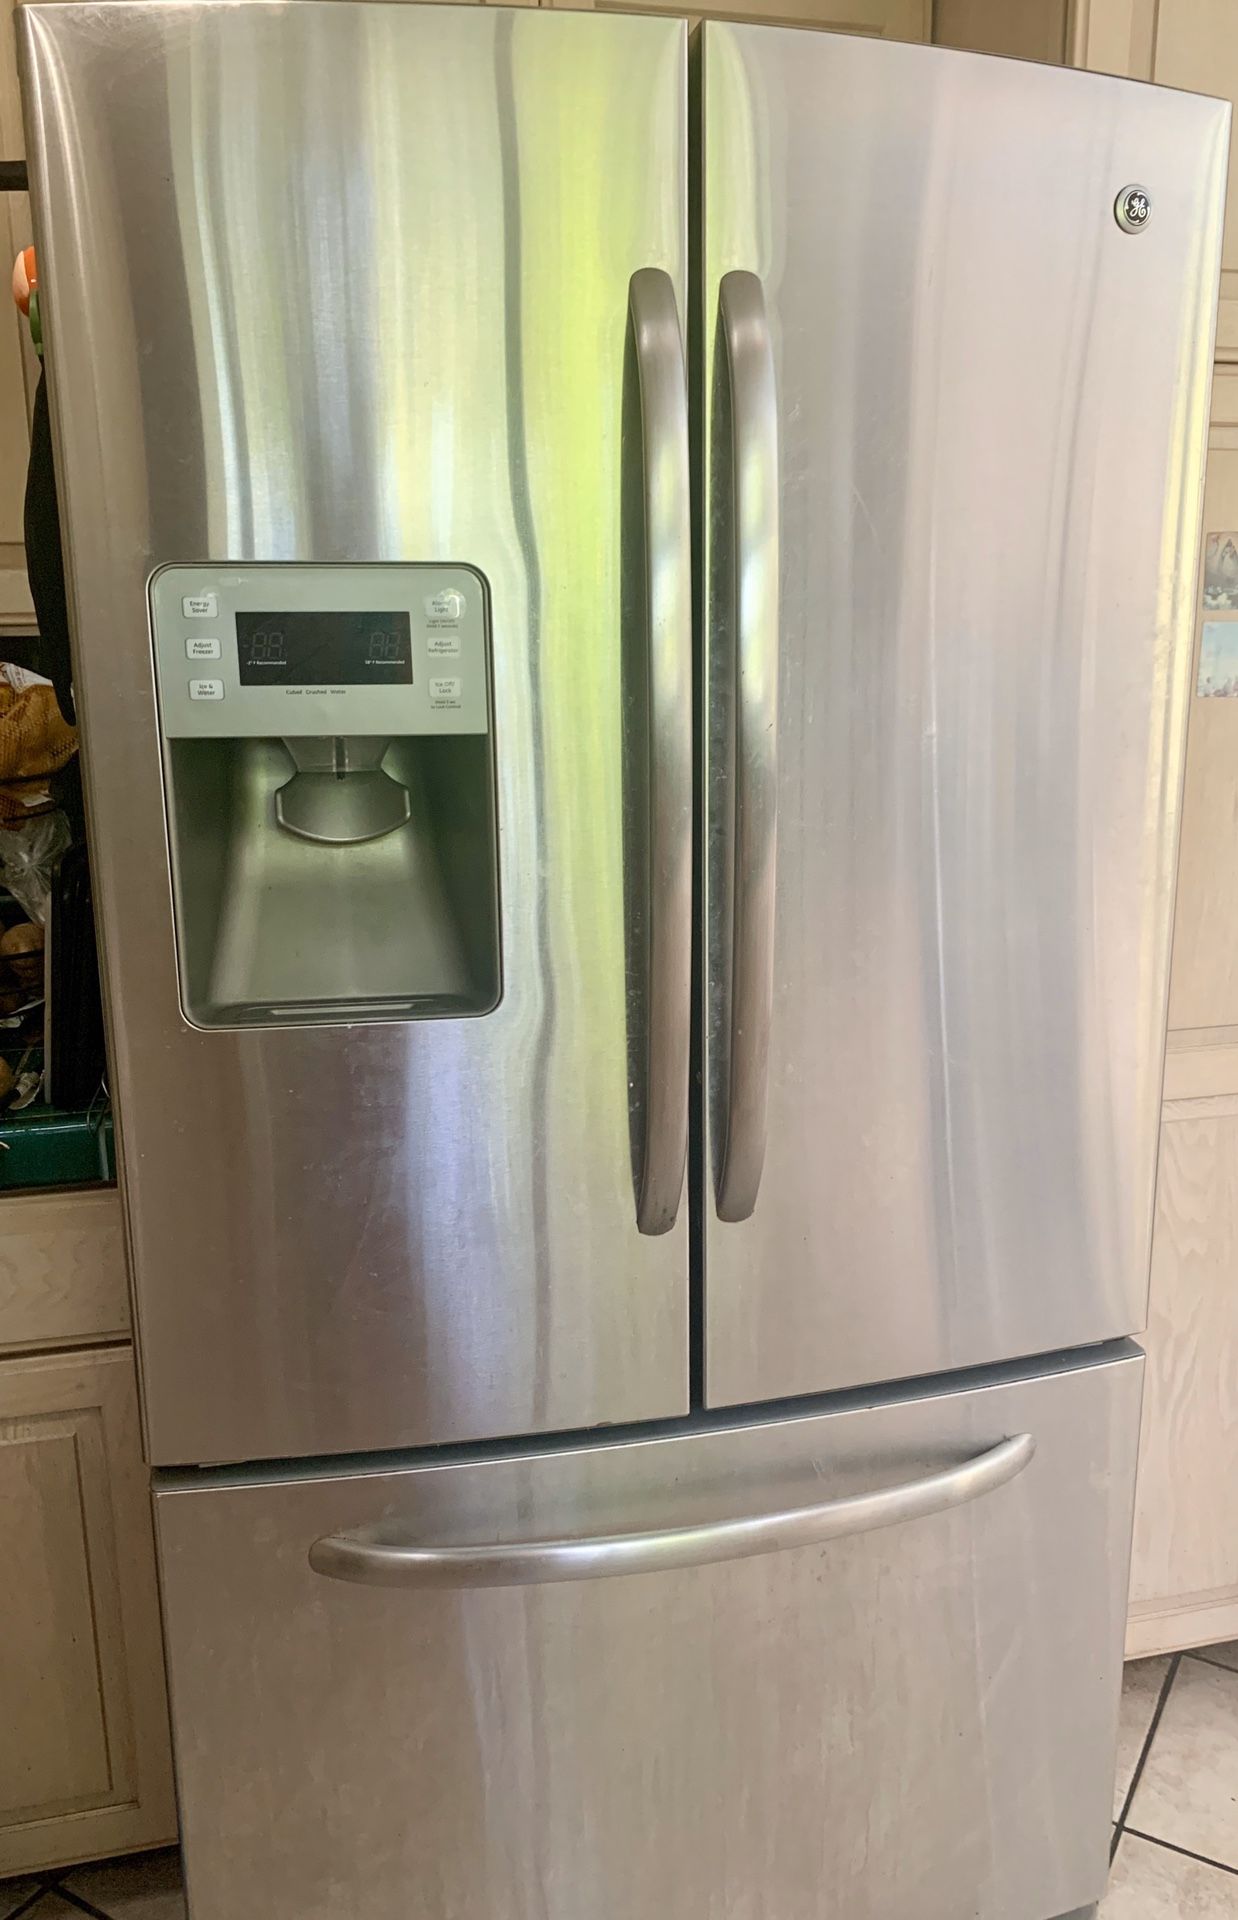 GE Energy Star Refrigerator w/French Doors & Ice Maker (doesn’t work)